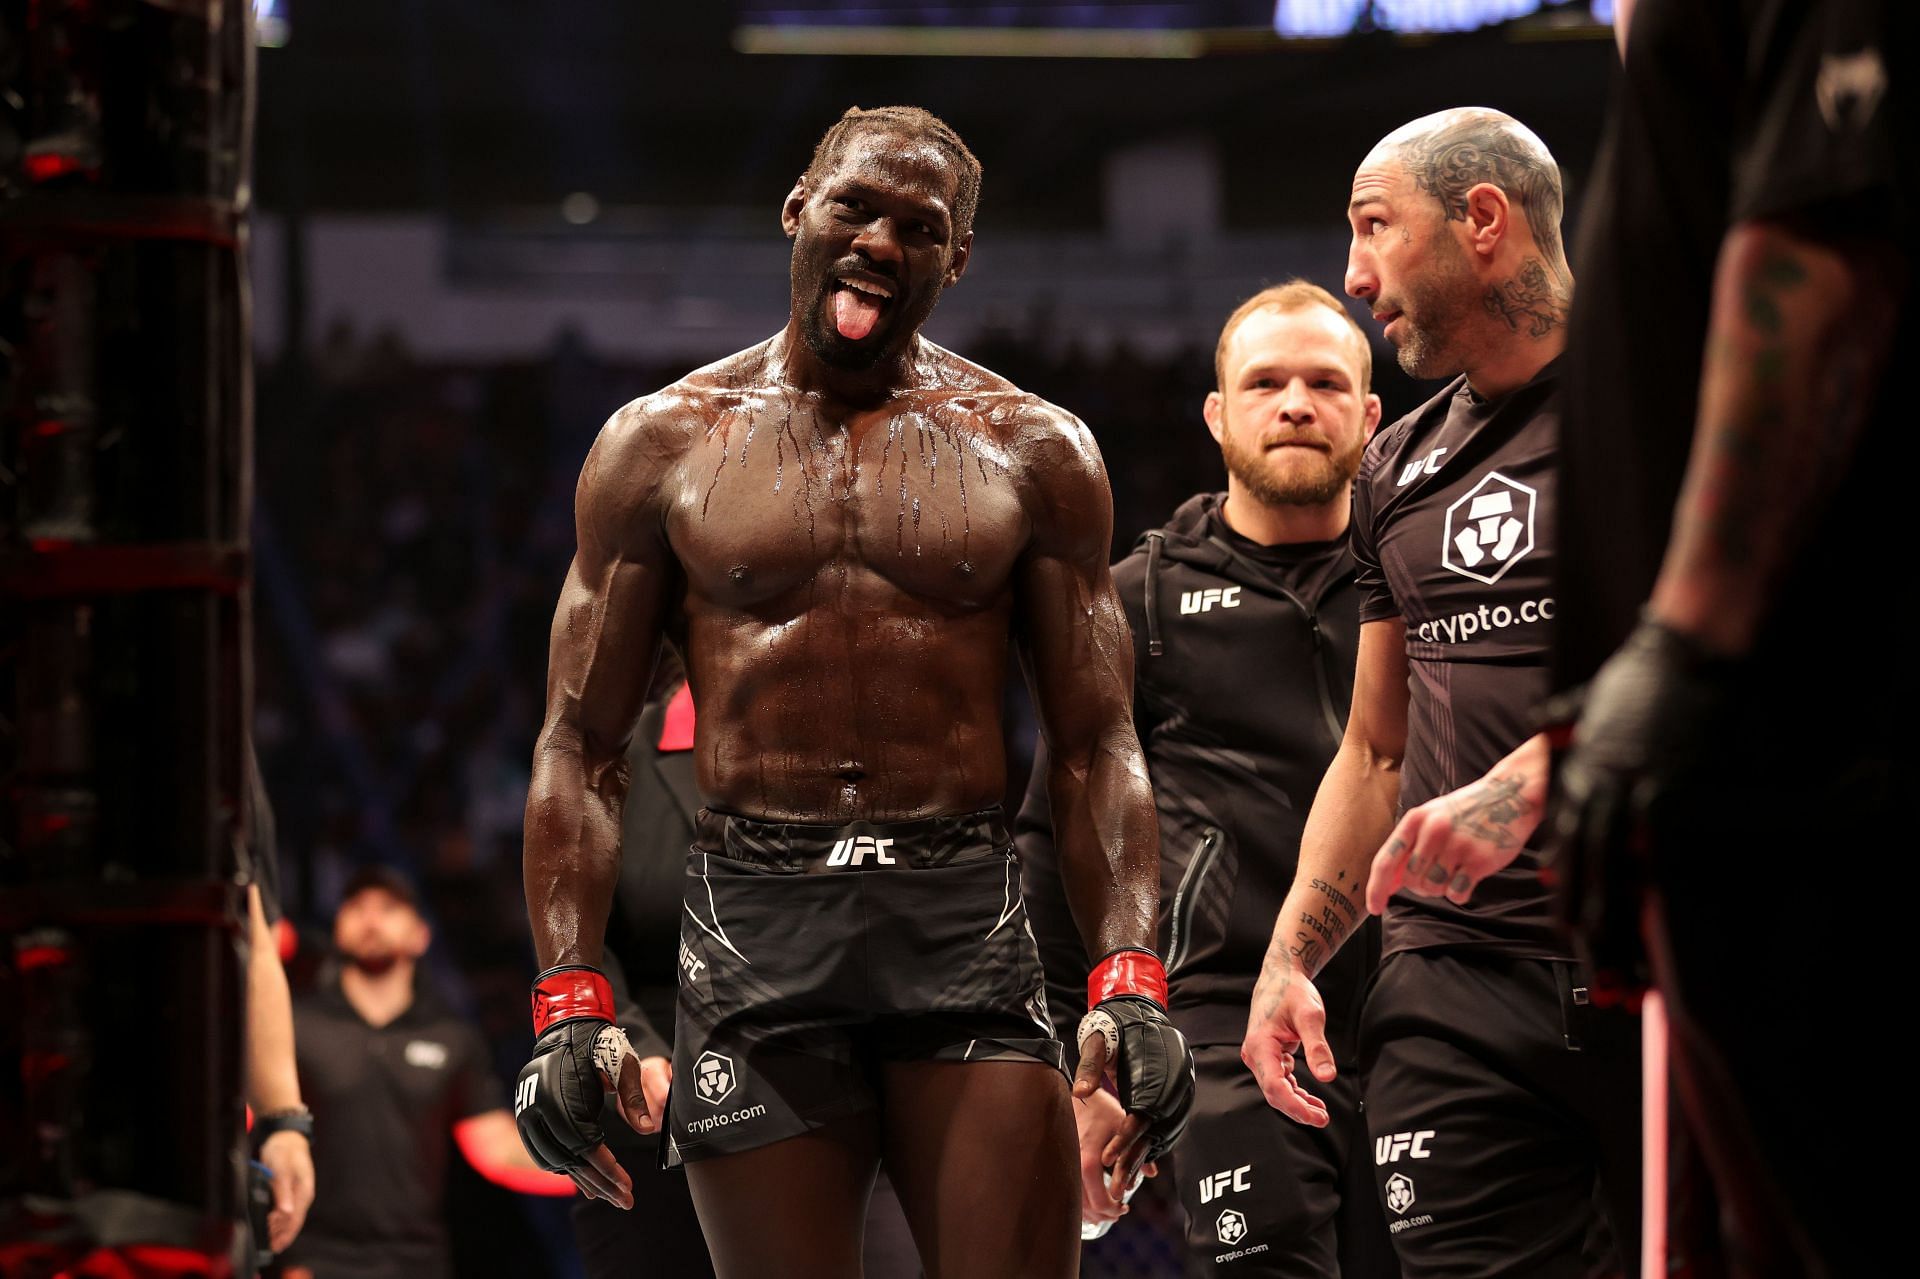 Jared Cannonier will be hopeful of a knockout when he faces Sean Strickland